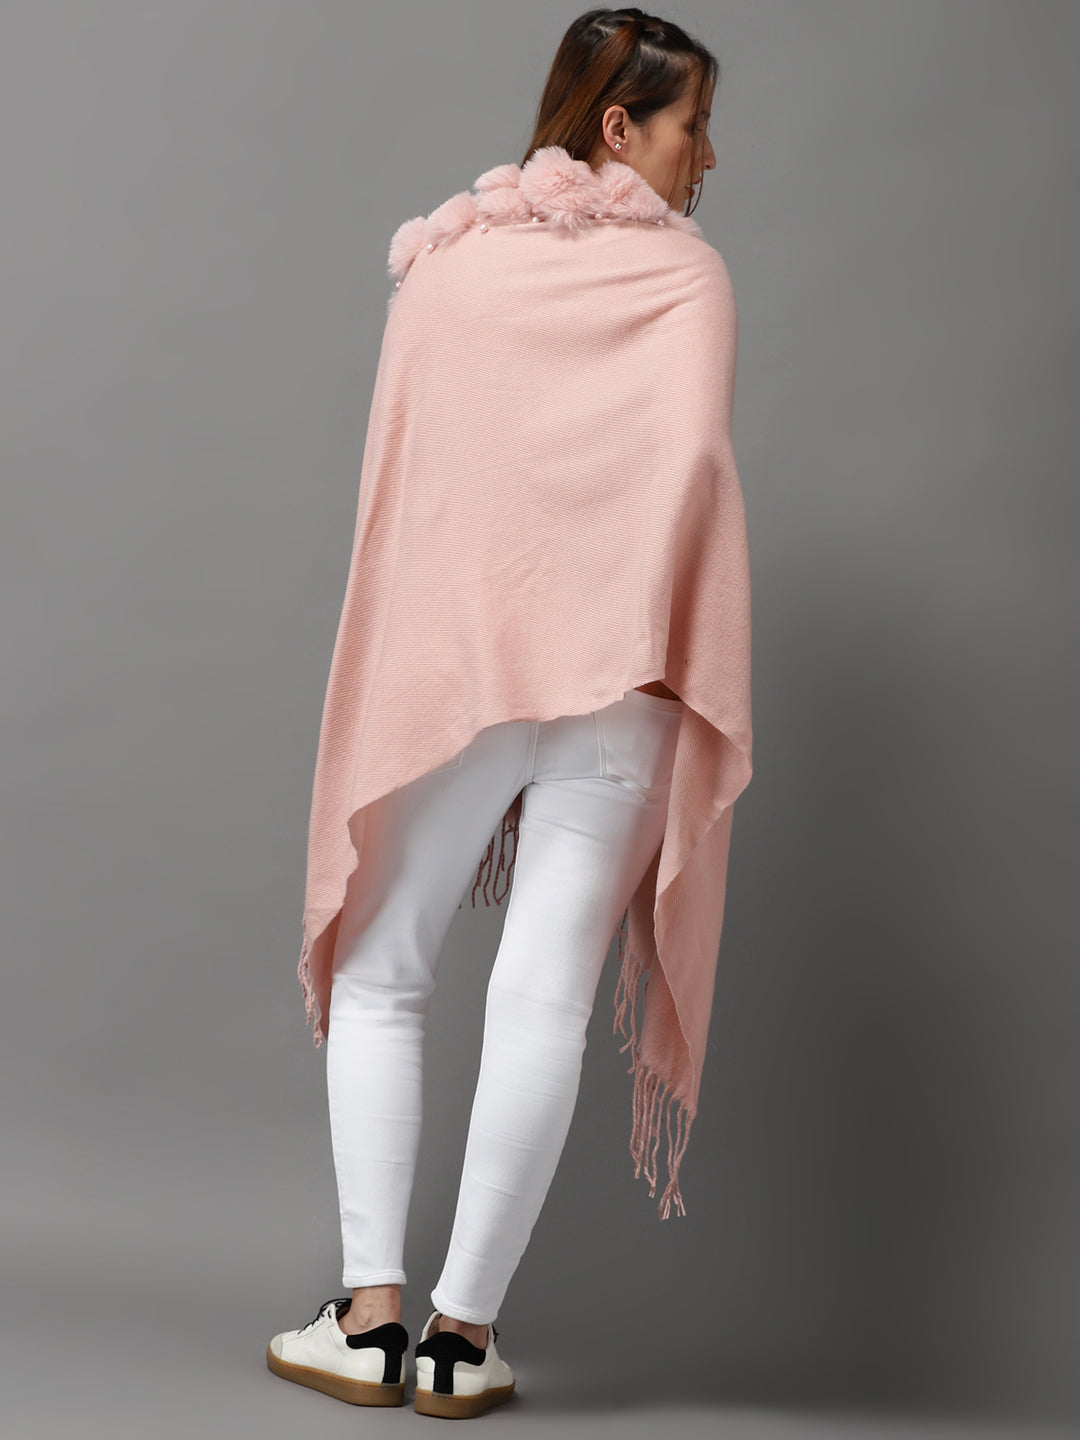 Women's Pink Solid Poncho Sweater